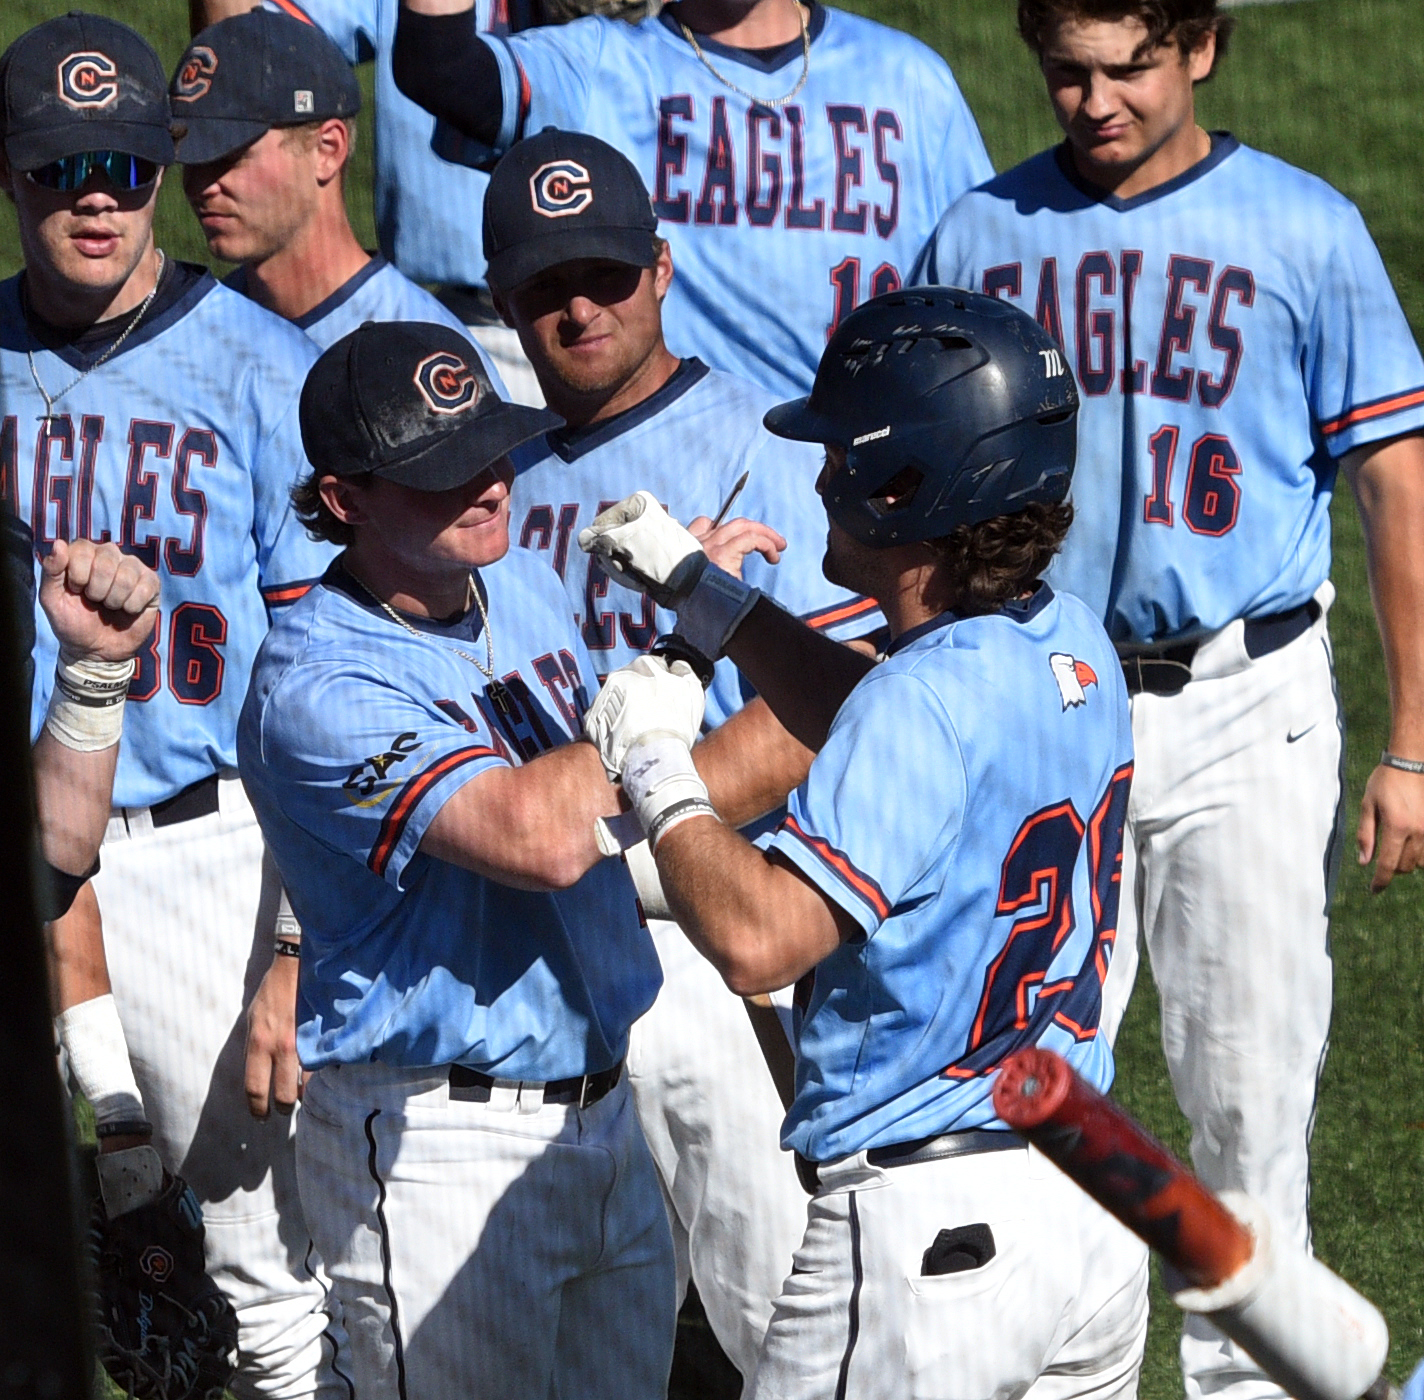 Eagles sweep Trojans, win 1000th game in program history